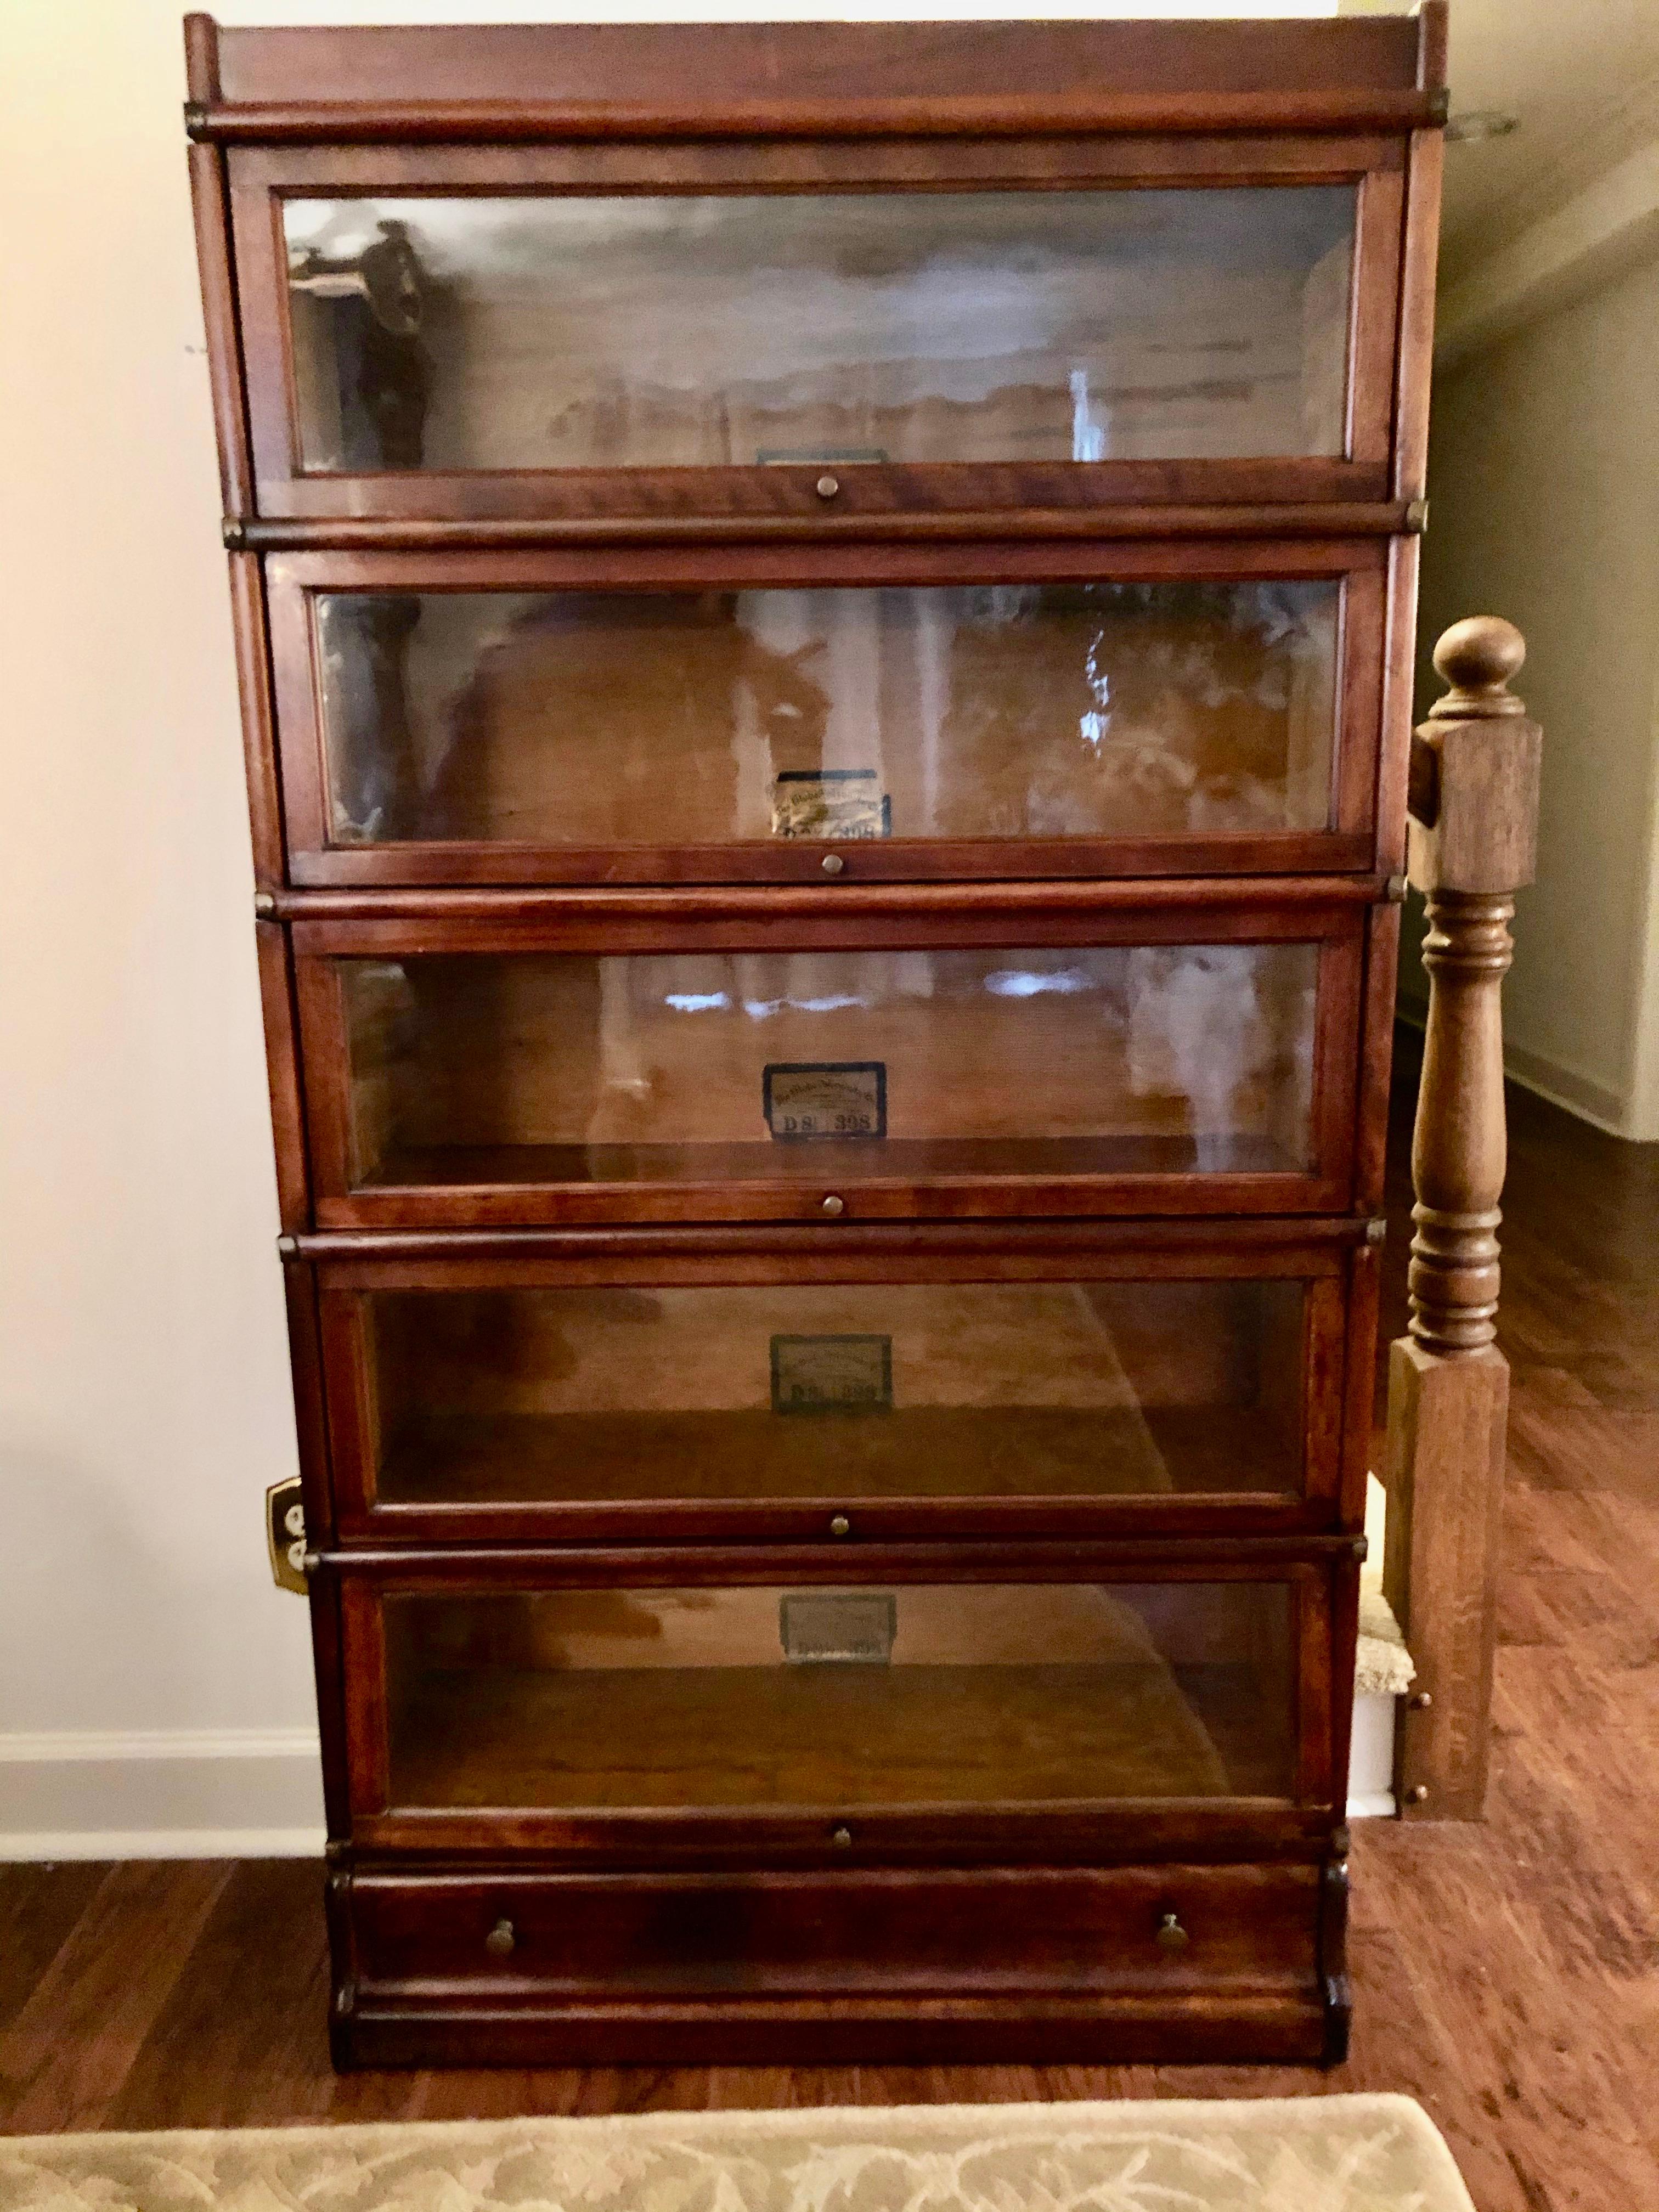 Terrific 7 section stacking oak barrister bookcase having 5 glass front compartments for storage and a header and footer piece. Created by the renowned Globe-Wernicke Co. One storage drawer at the bottom.
Measurements of each box taken from front